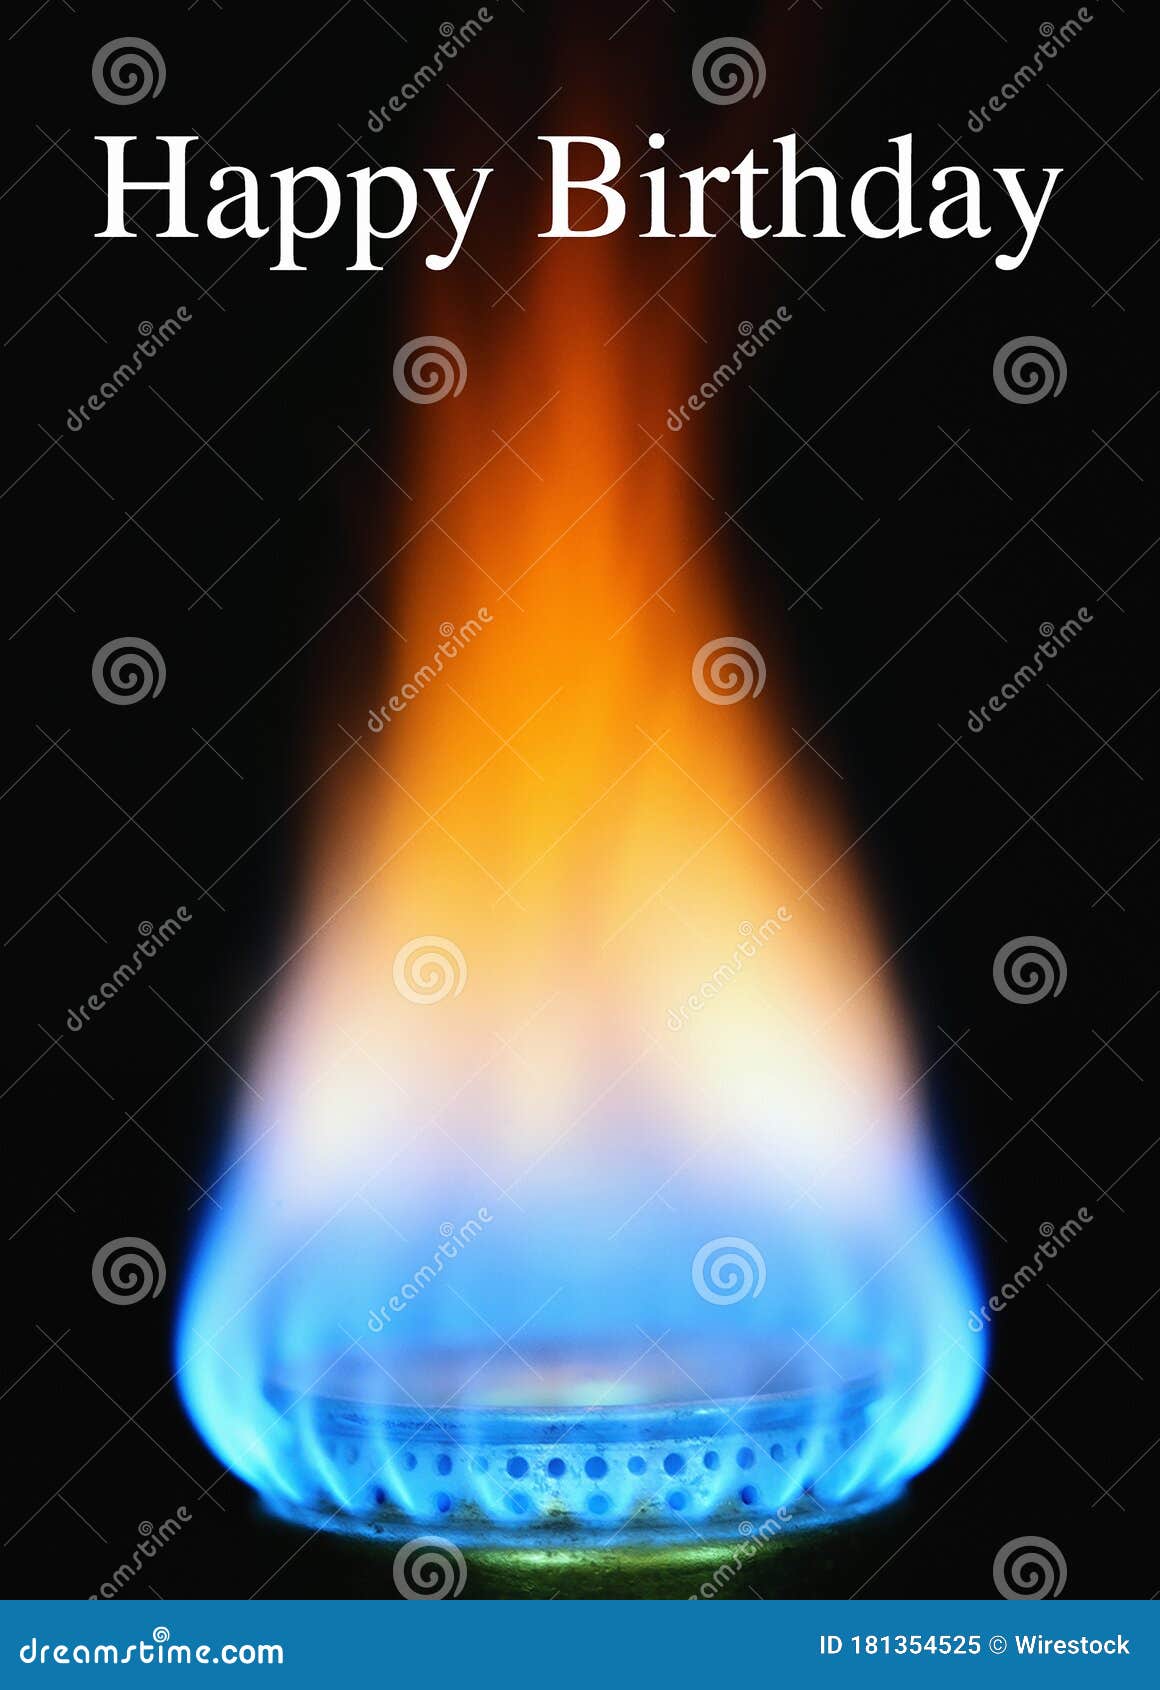 Generator Componeren Welsprekend Vertical Shot of Fire Coming Out of the Stove and Happy Birthday Written  Over it Stock Image - Image of baked, dessert: 181354525